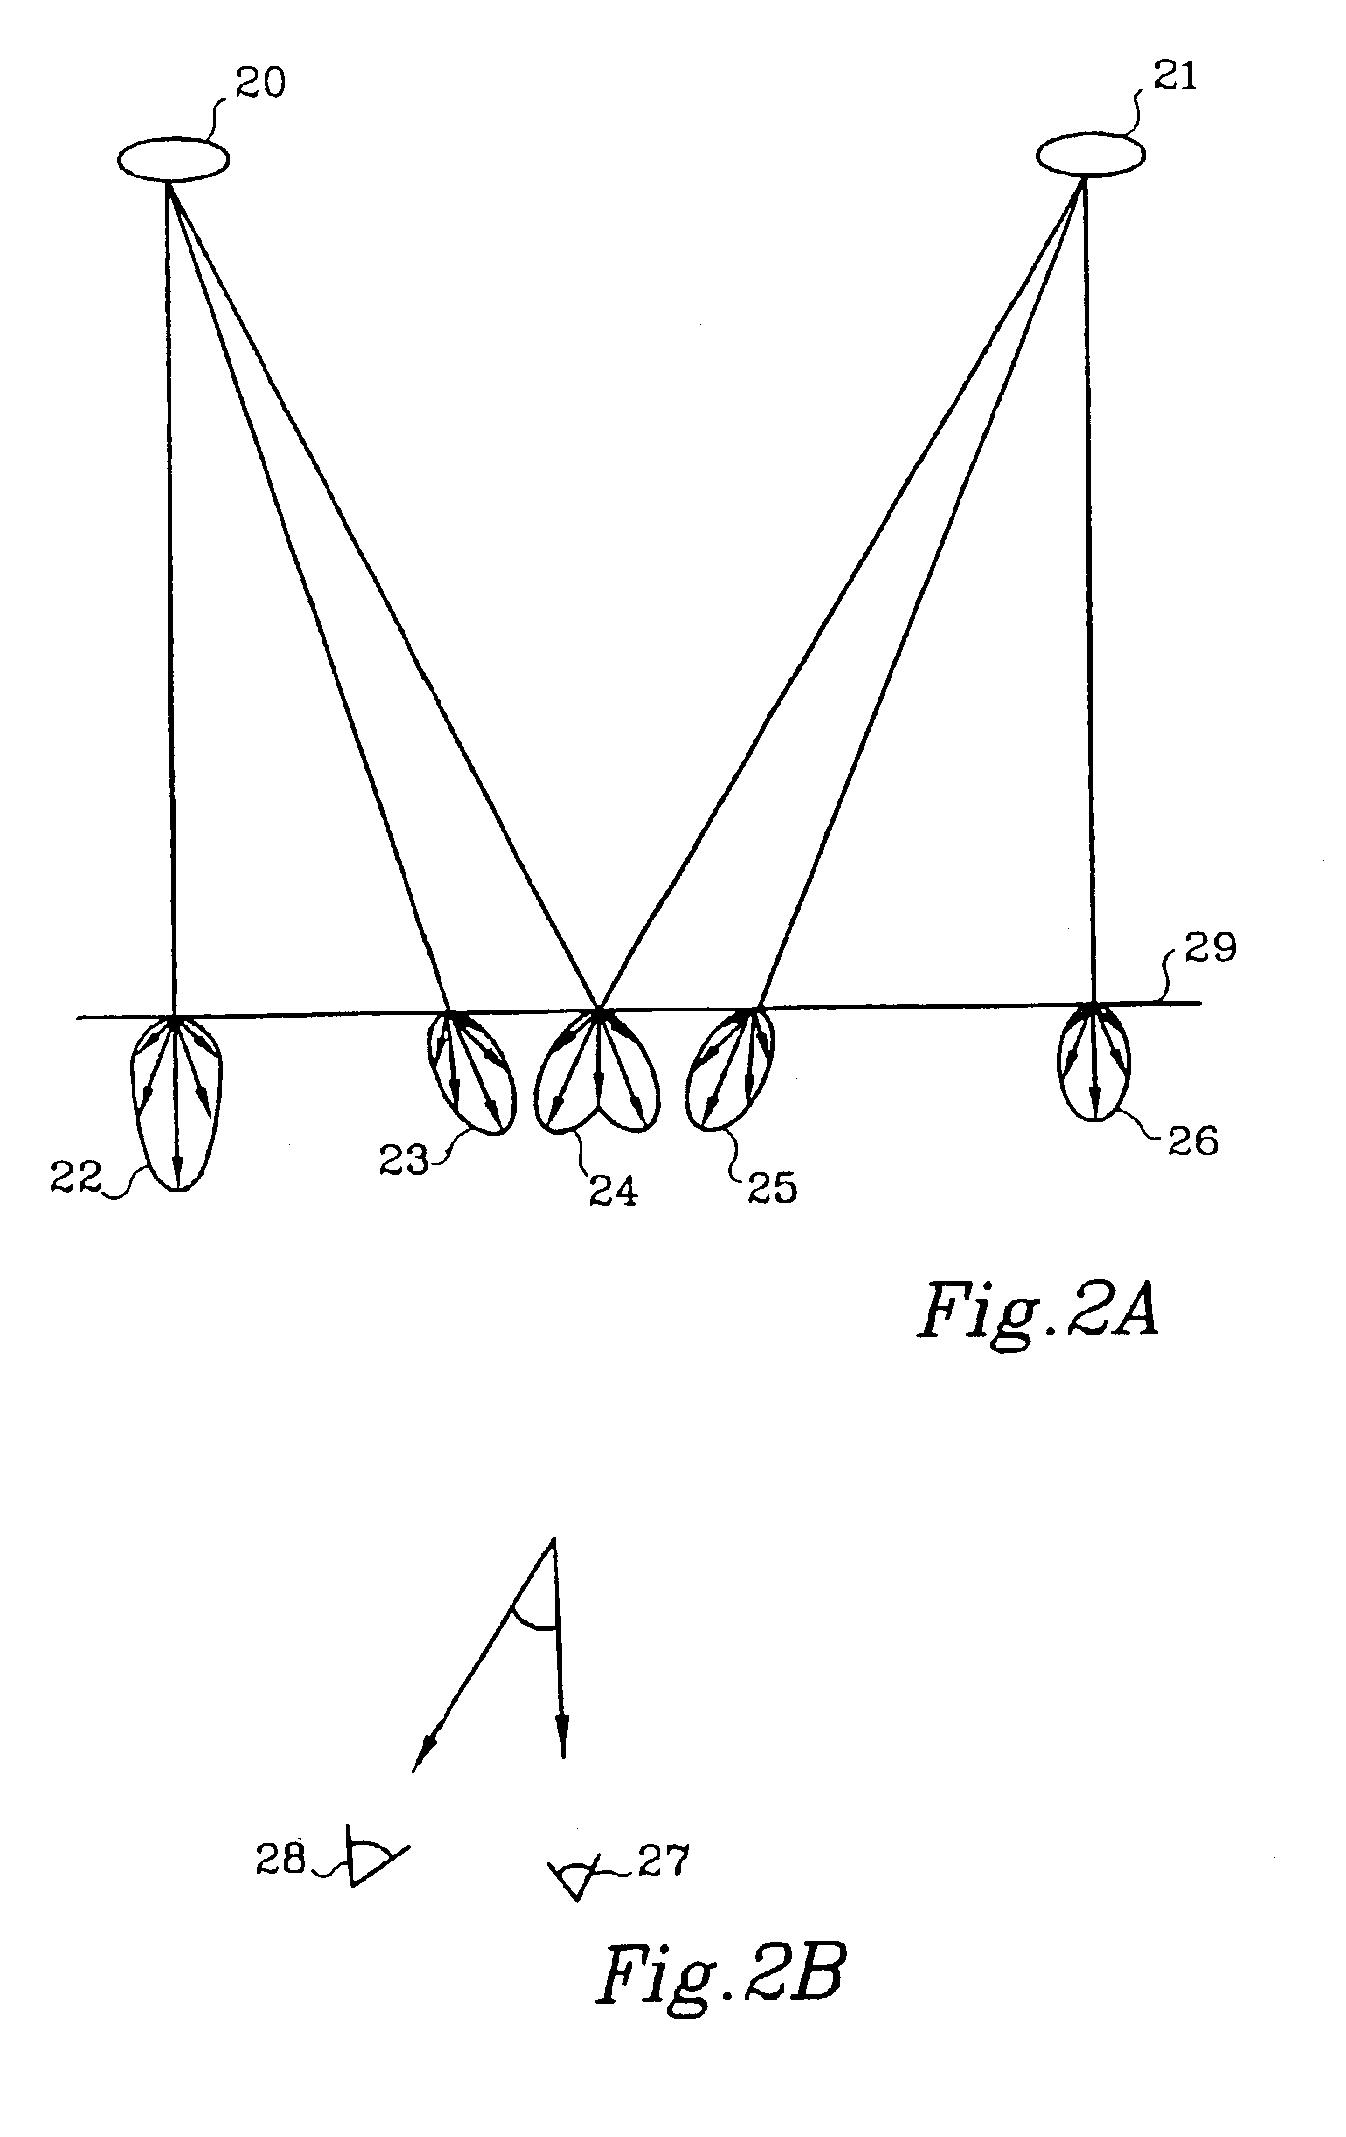 Display screen and method of manufacture therefor